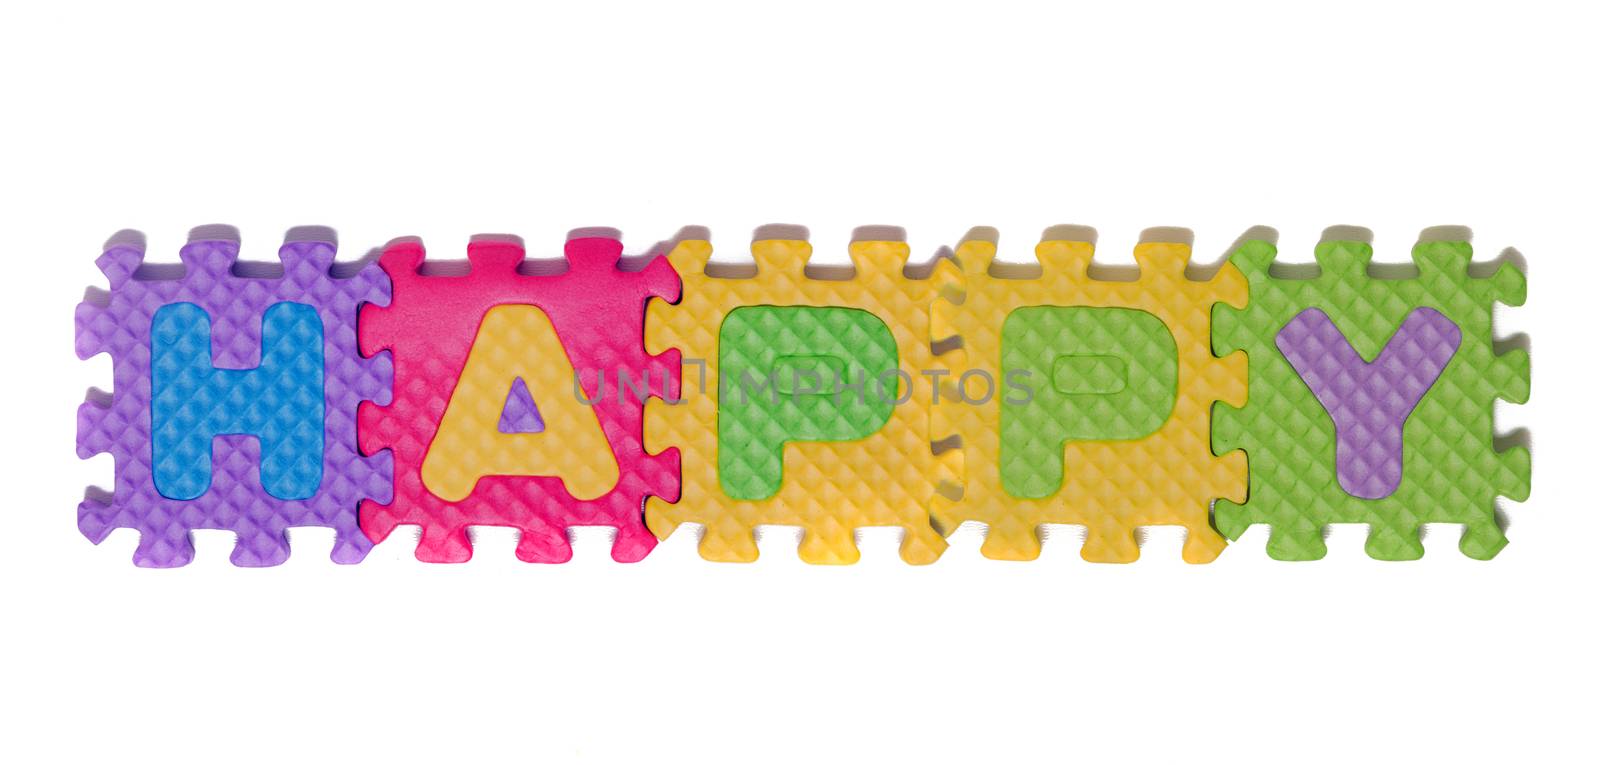 Foam puzzle letter uppercase with word Happy isolated on a white background.